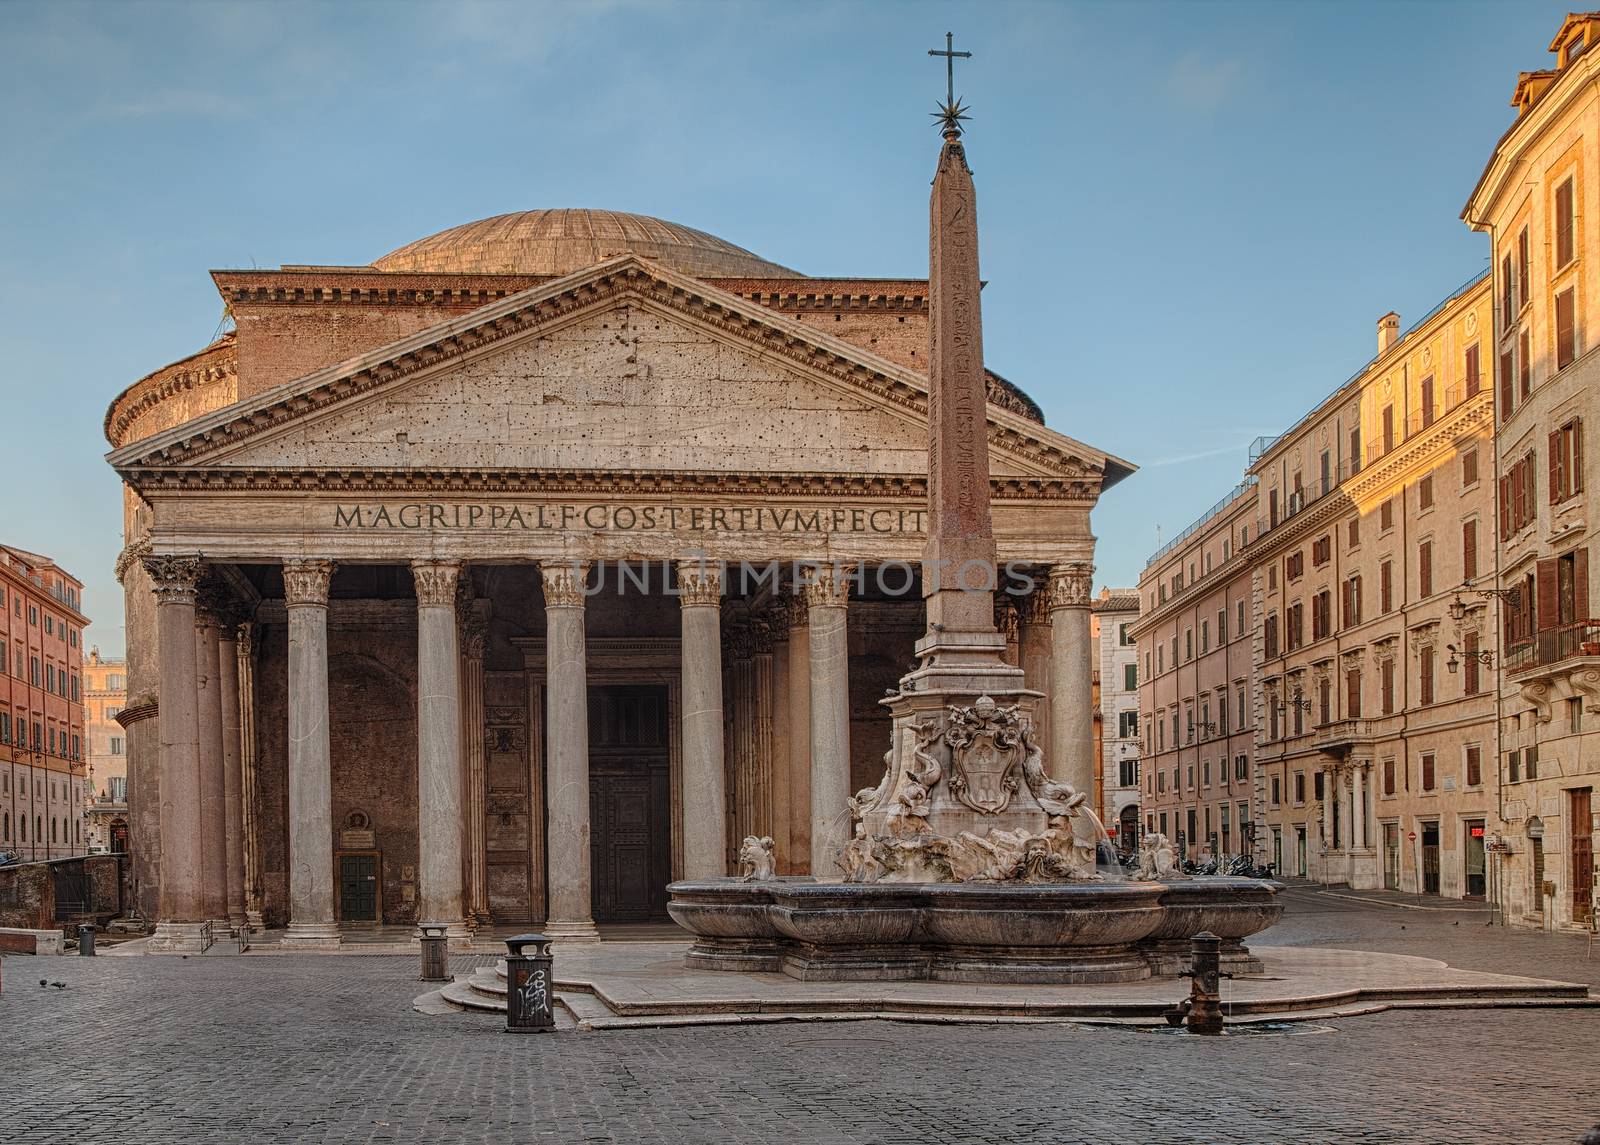 The Pantheon is a building in Rome, Italy